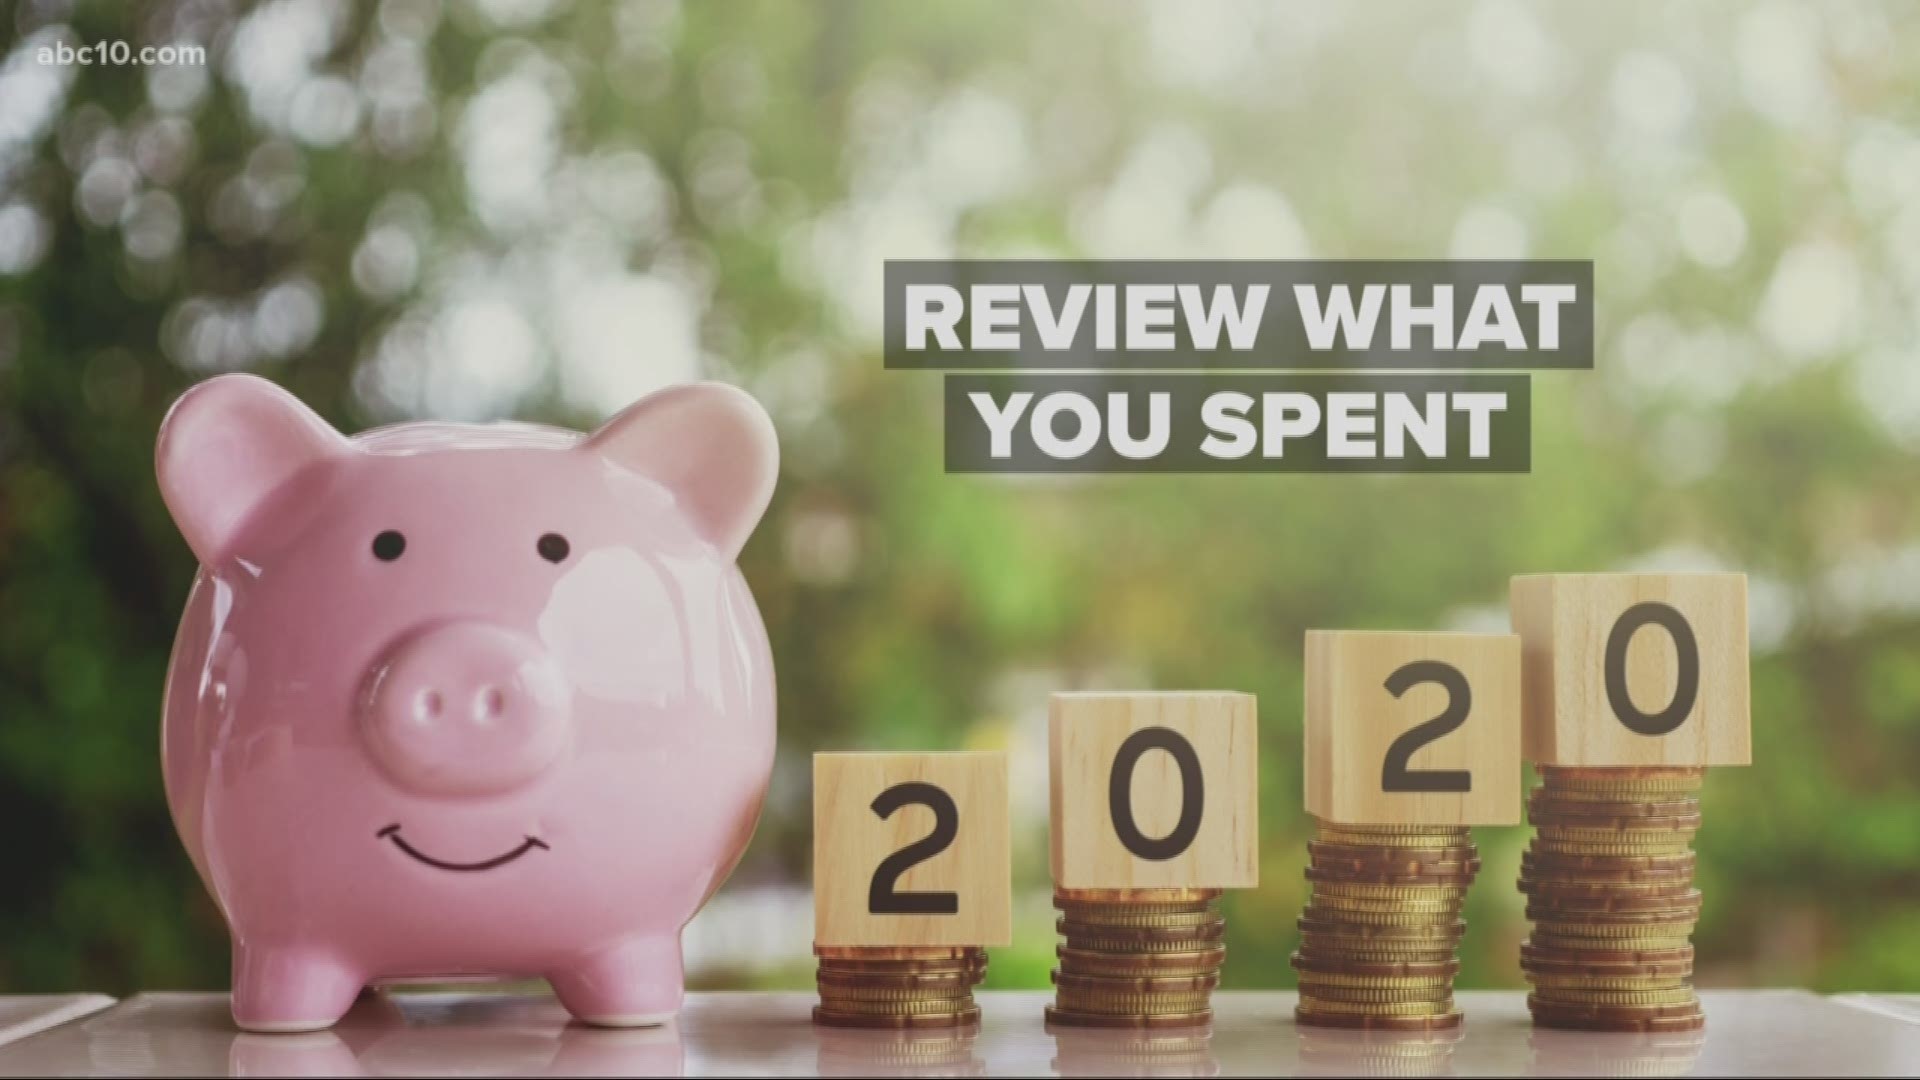 Brittany Begley has a few tips to hold yourself accountable and keep those money resolutions in the new year.